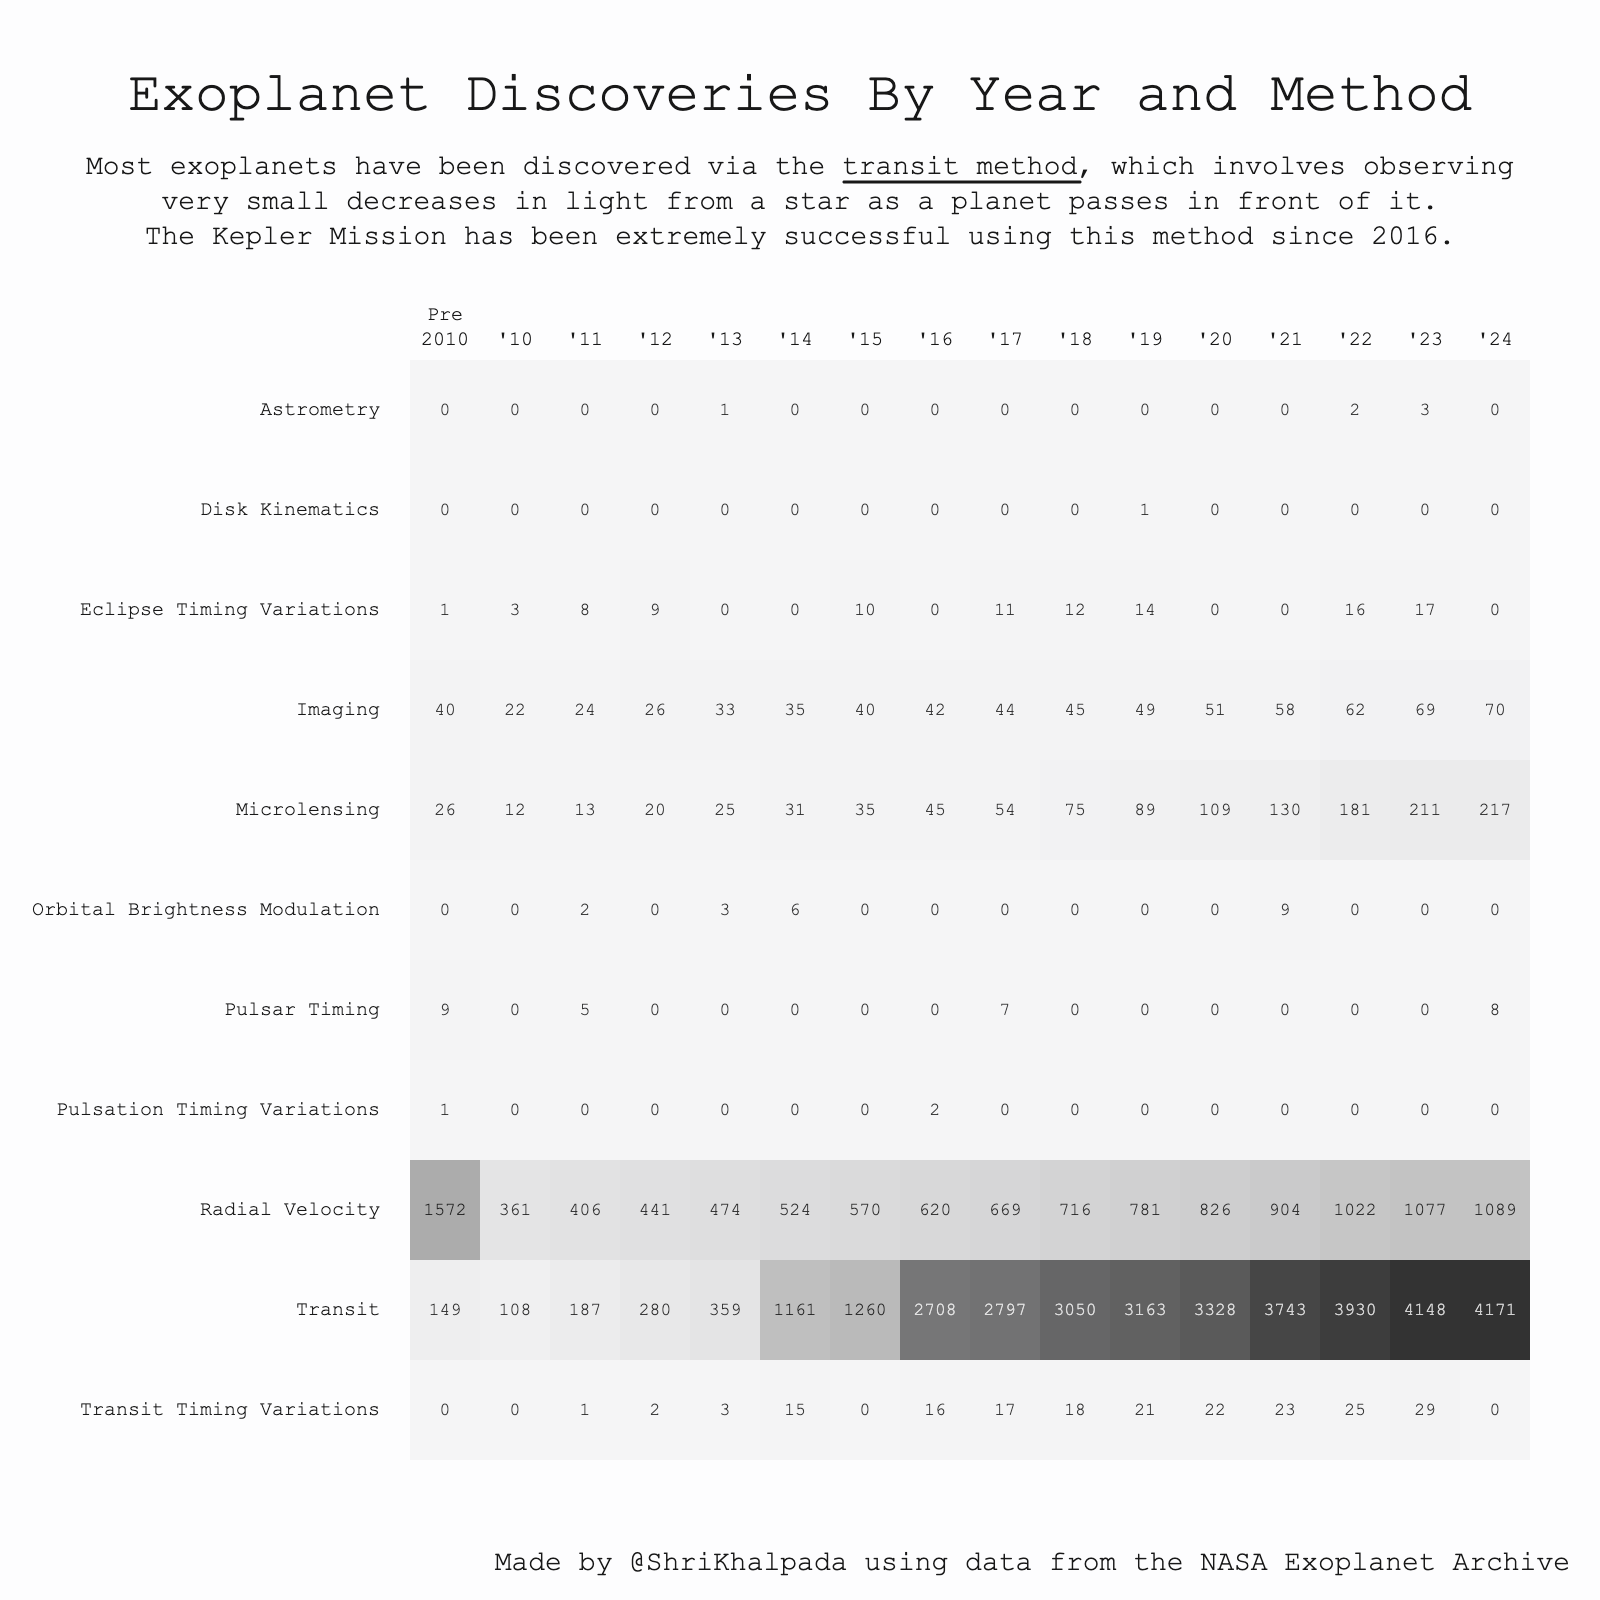 A heatmap showing that we've found thousands of exoplanets in recent years using the 'Transit Method', which involves decreases in observed light from a star as a planet passes in front of it